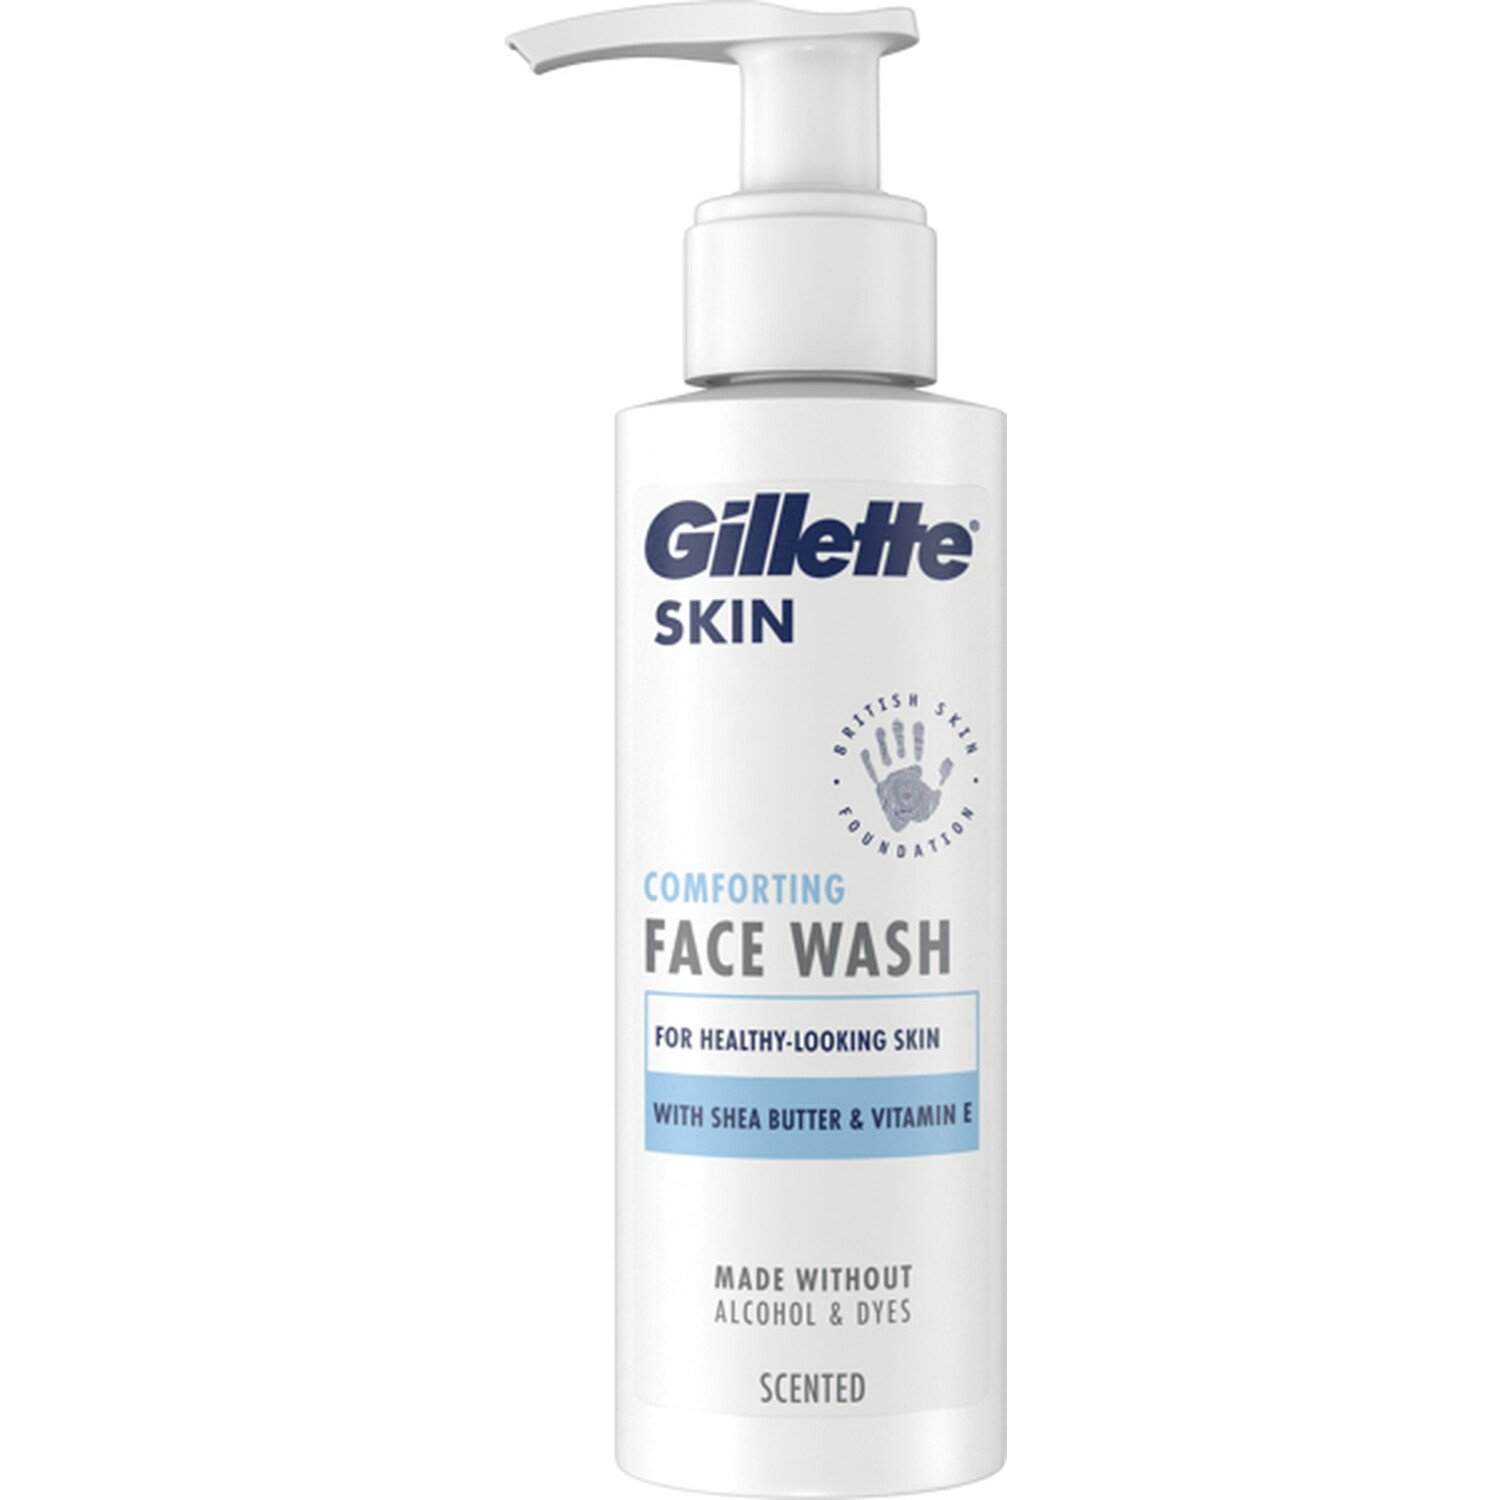 Gillette Skin Comforting Scented Face Wash 140ml Image